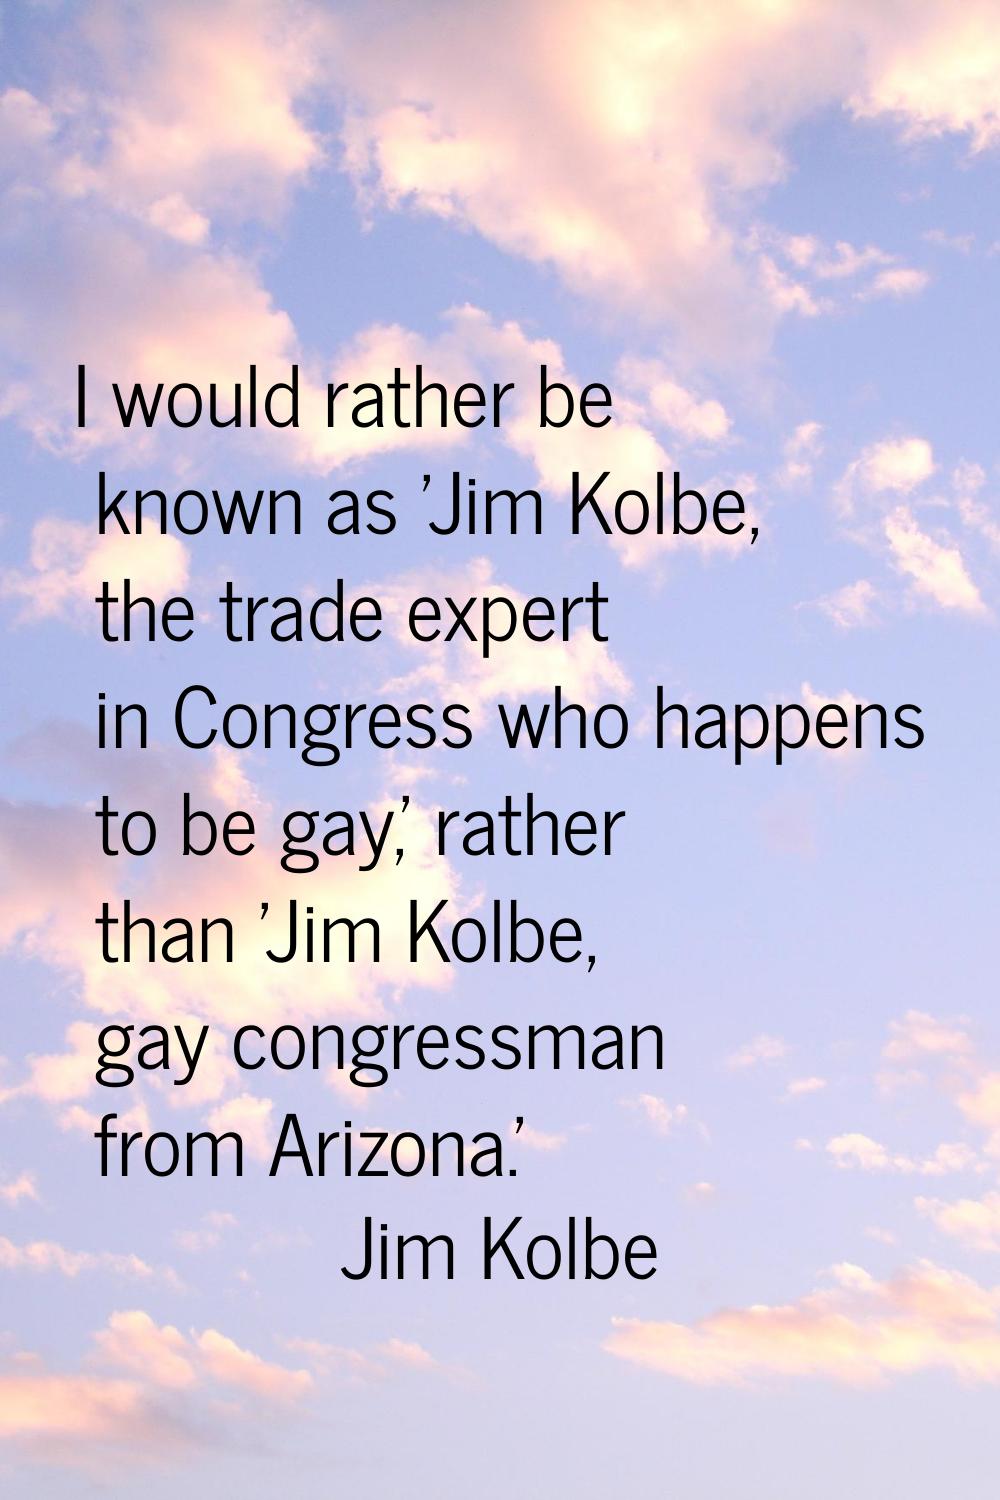 I would rather be known as 'Jim Kolbe, the trade expert in Congress who happens to be gay,' rather 